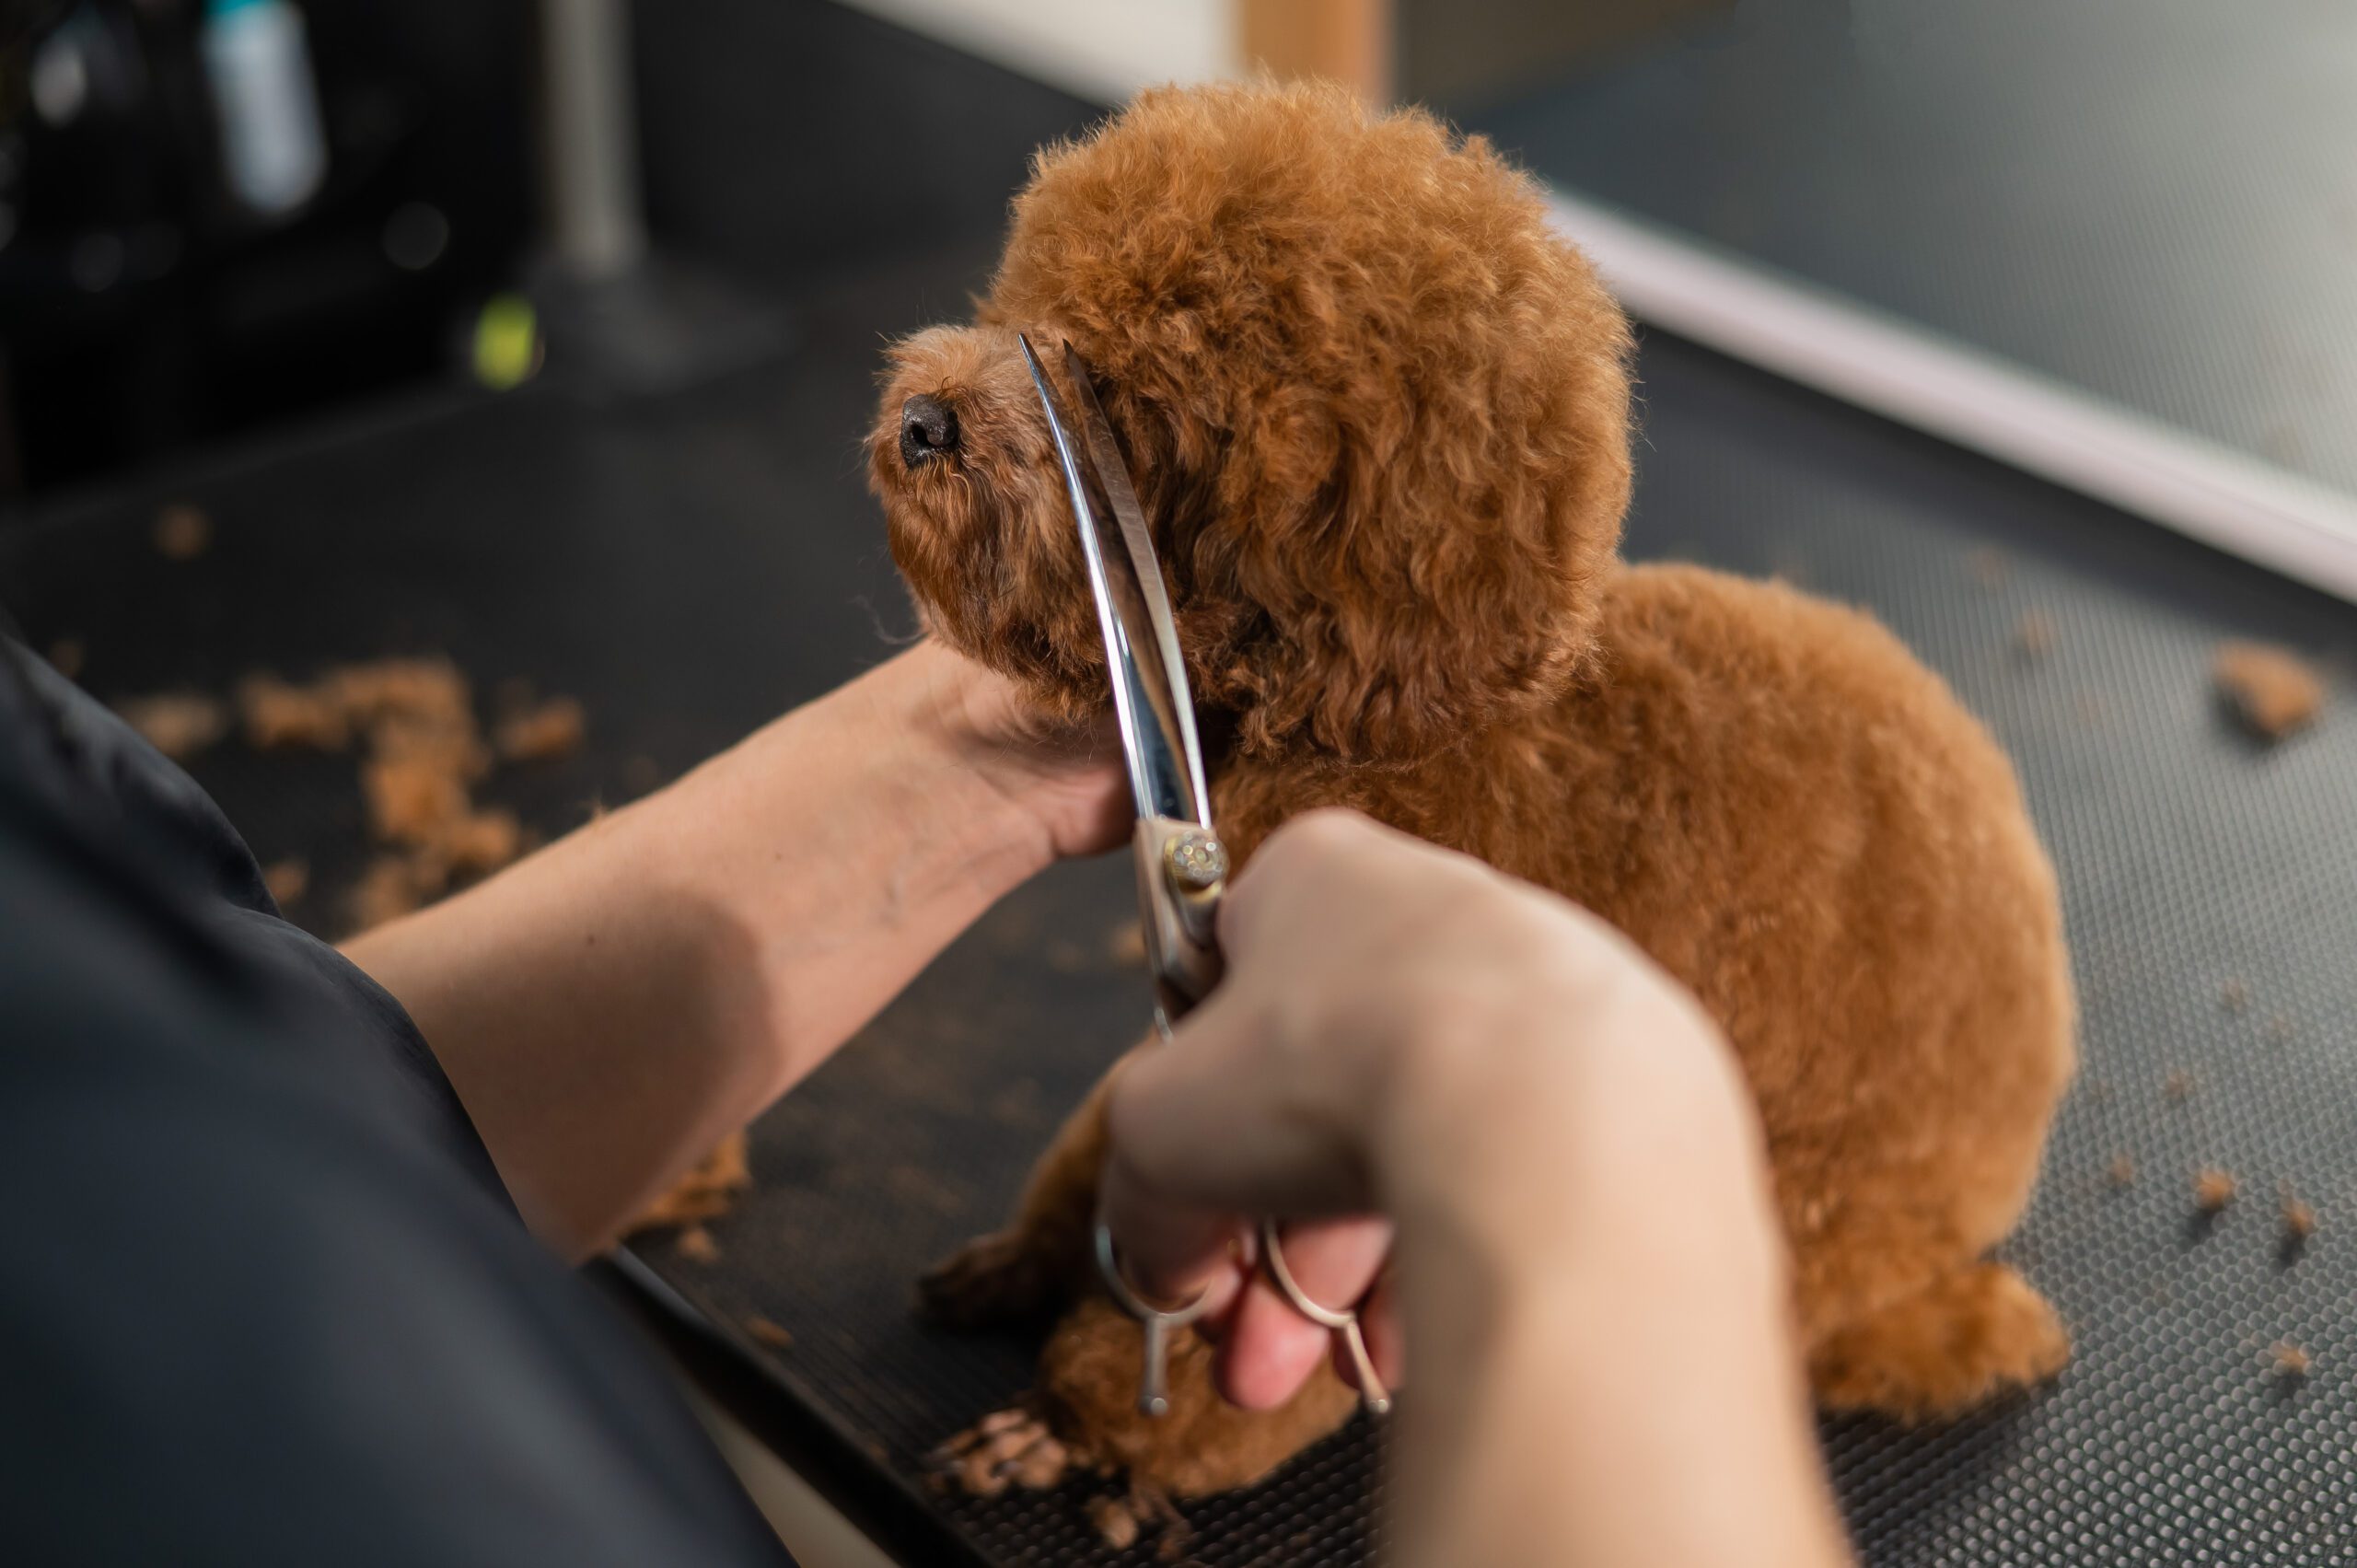 Woman Trimming Toy Poodle With Scissors In Grooming Salon.